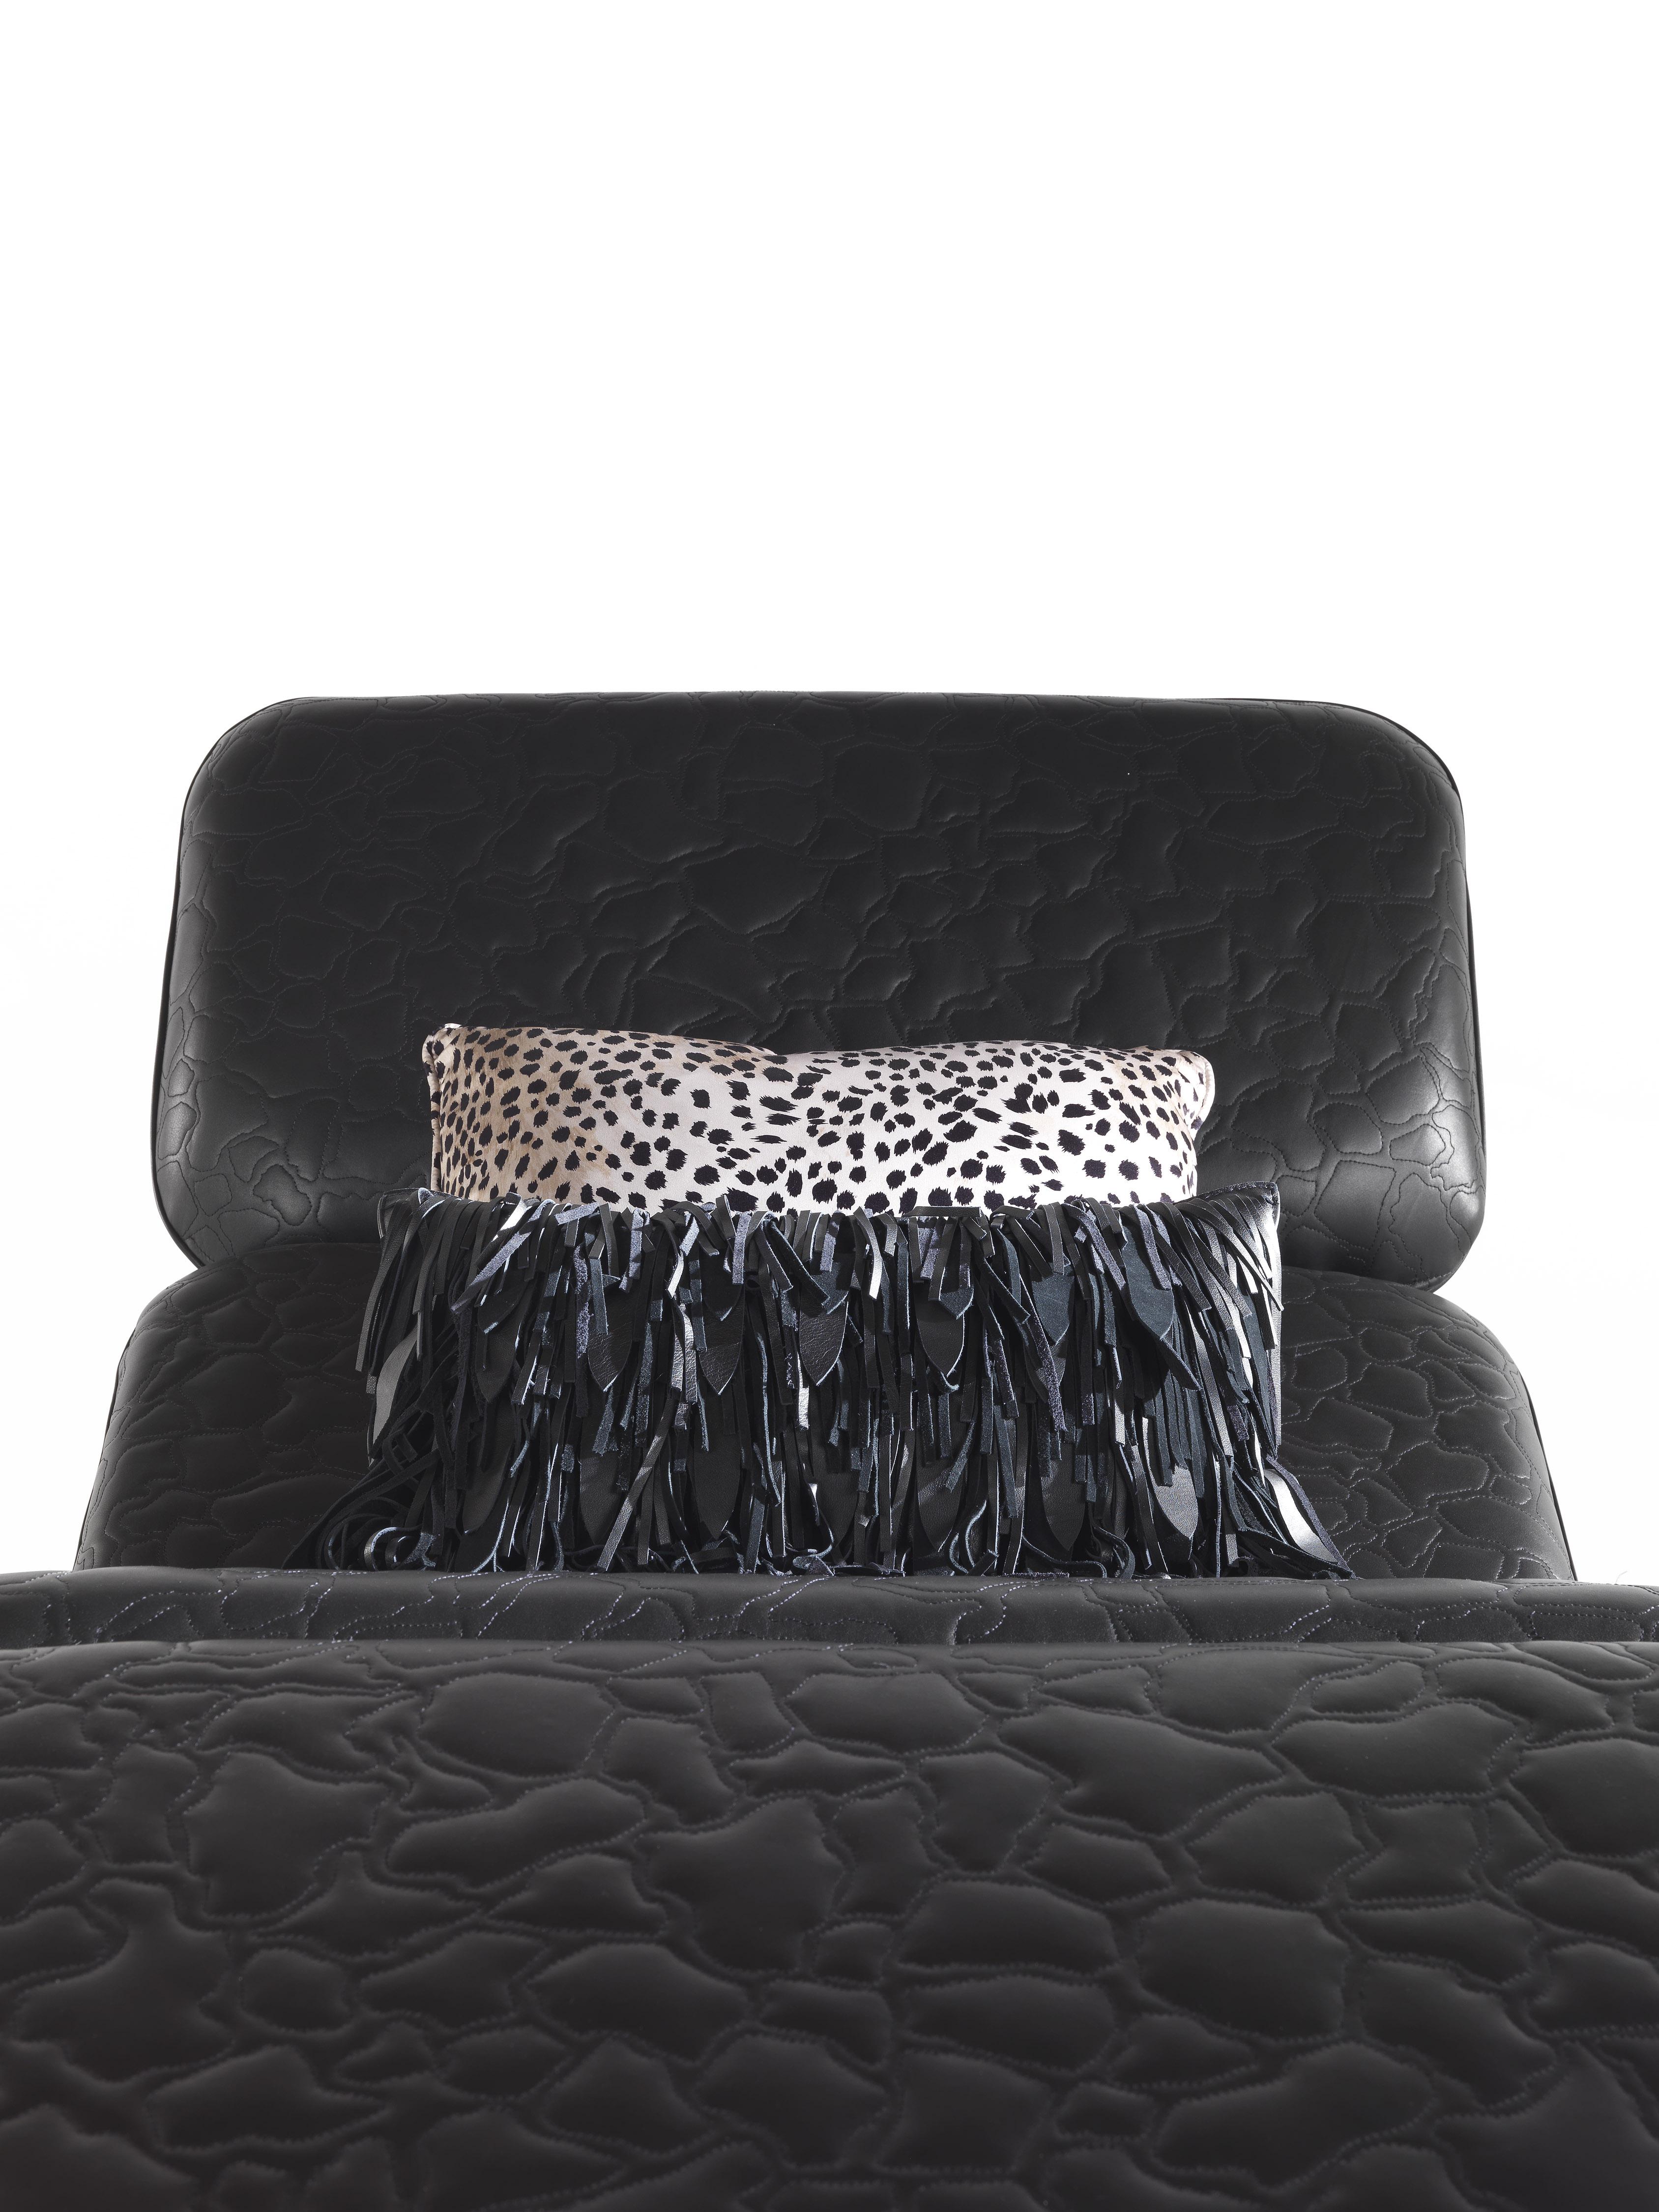 Italian 21st Century Tahiti Chaise Lounge in Leather by Roberto Cavalli Home Interiors For Sale